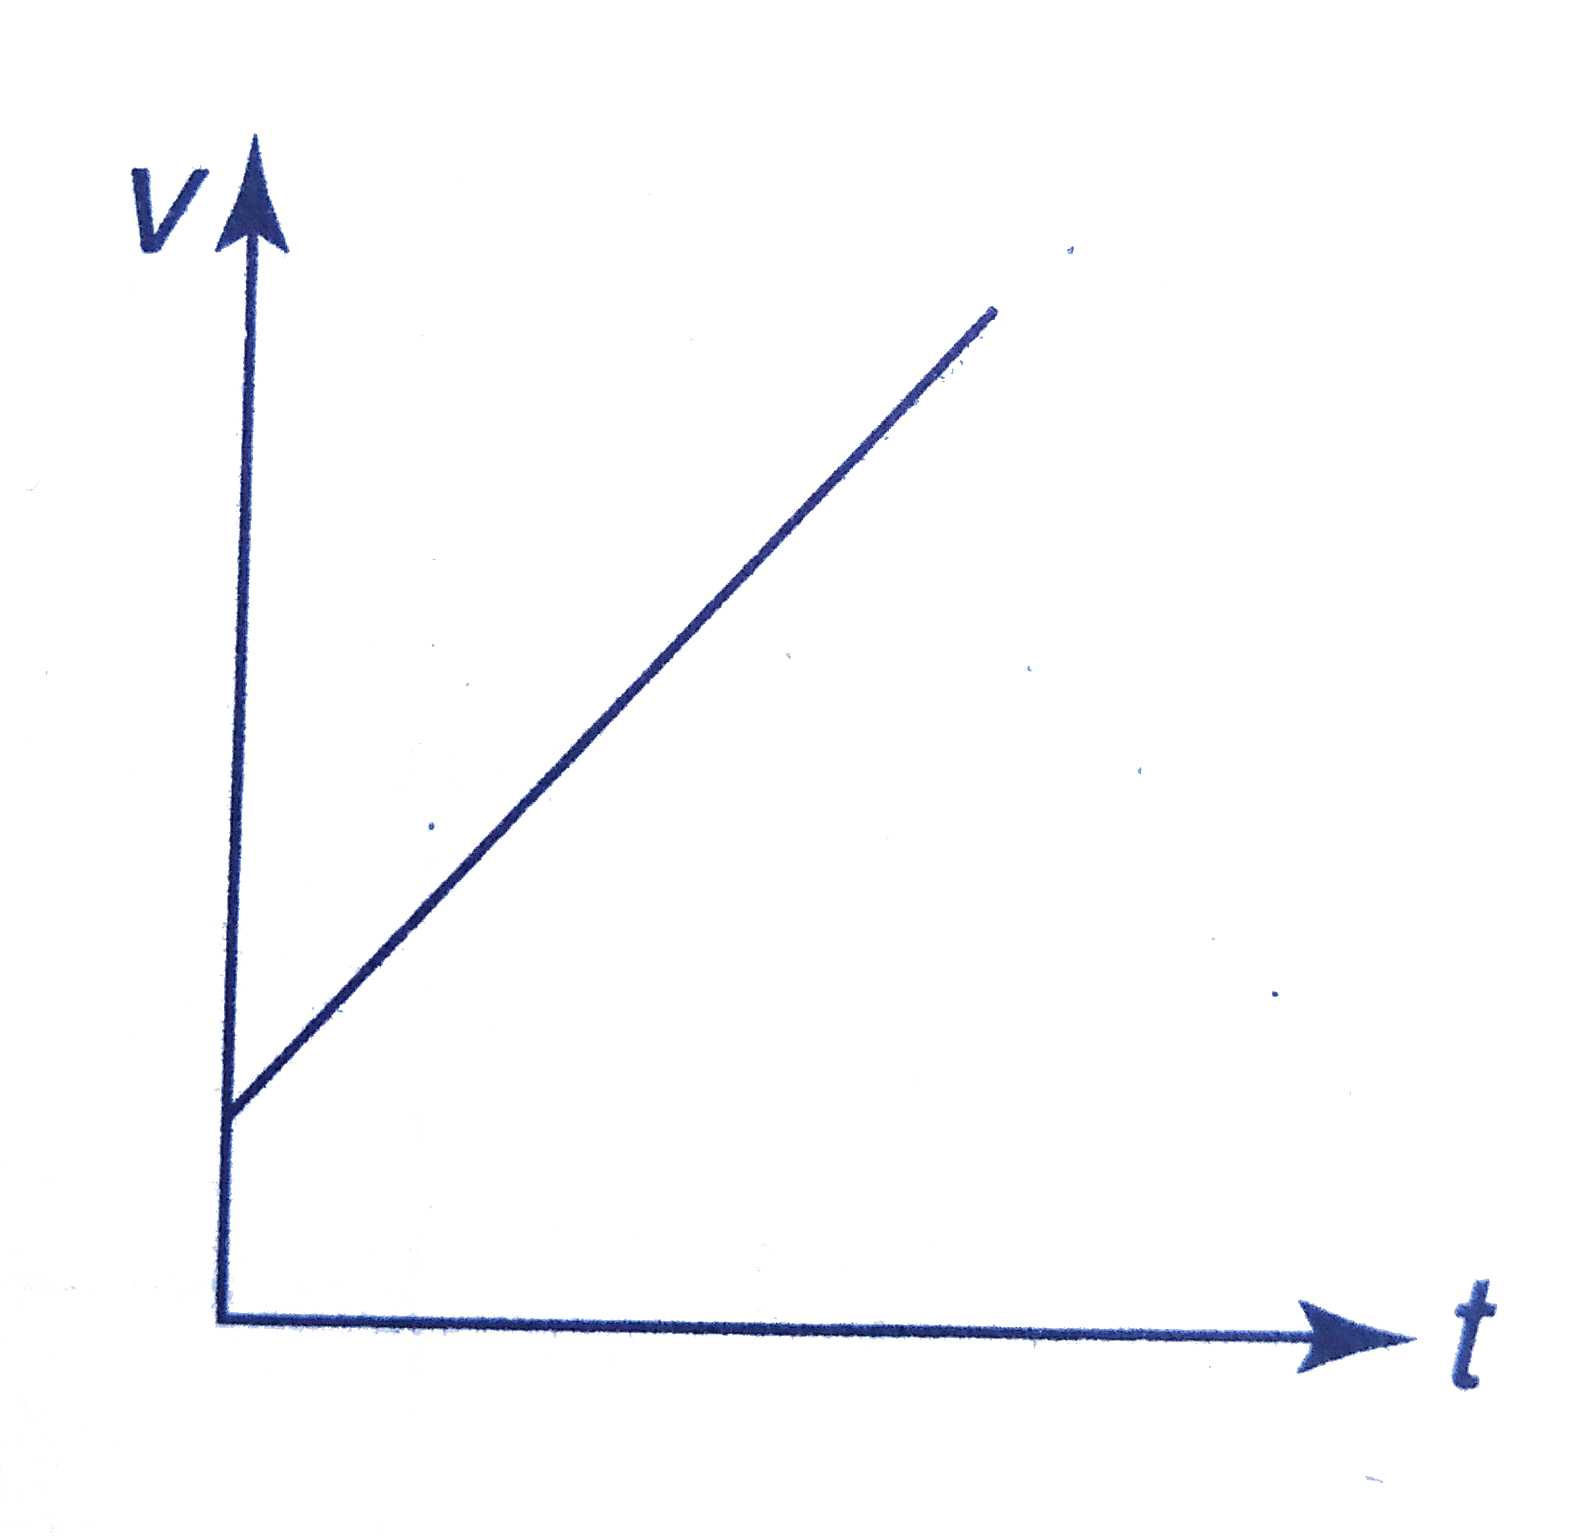 Figure shows a velocity-time graph. This shows that.